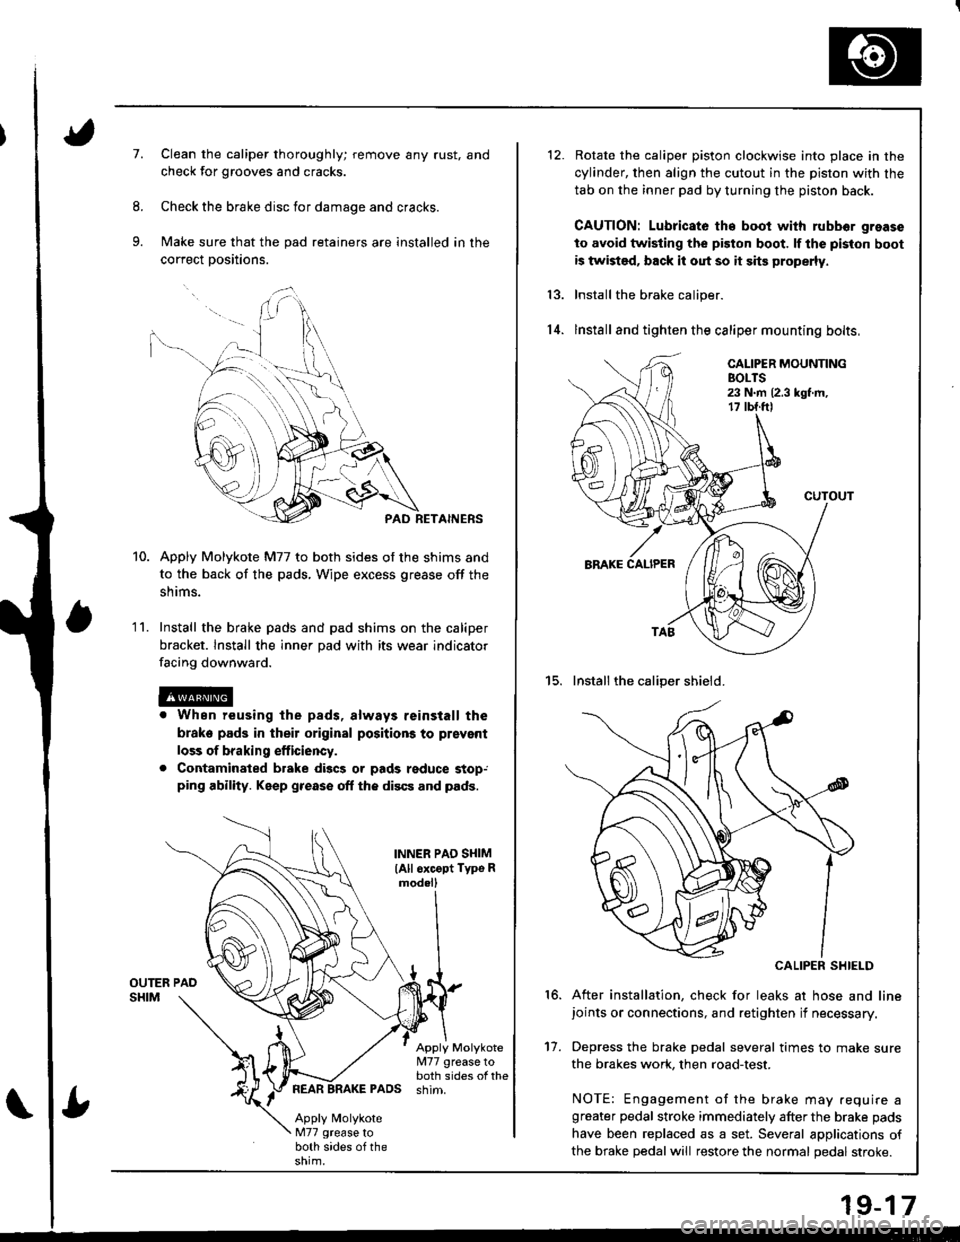 HONDA INTEGRA 1998 4.G Workshop Manual 7.Clean the caliper thoroughly; remove any rust, and
check for grooves and cracks.
Check the brake disc for damage and cracks.
Make sure that the pad retainers are installed in the
correct positions.
